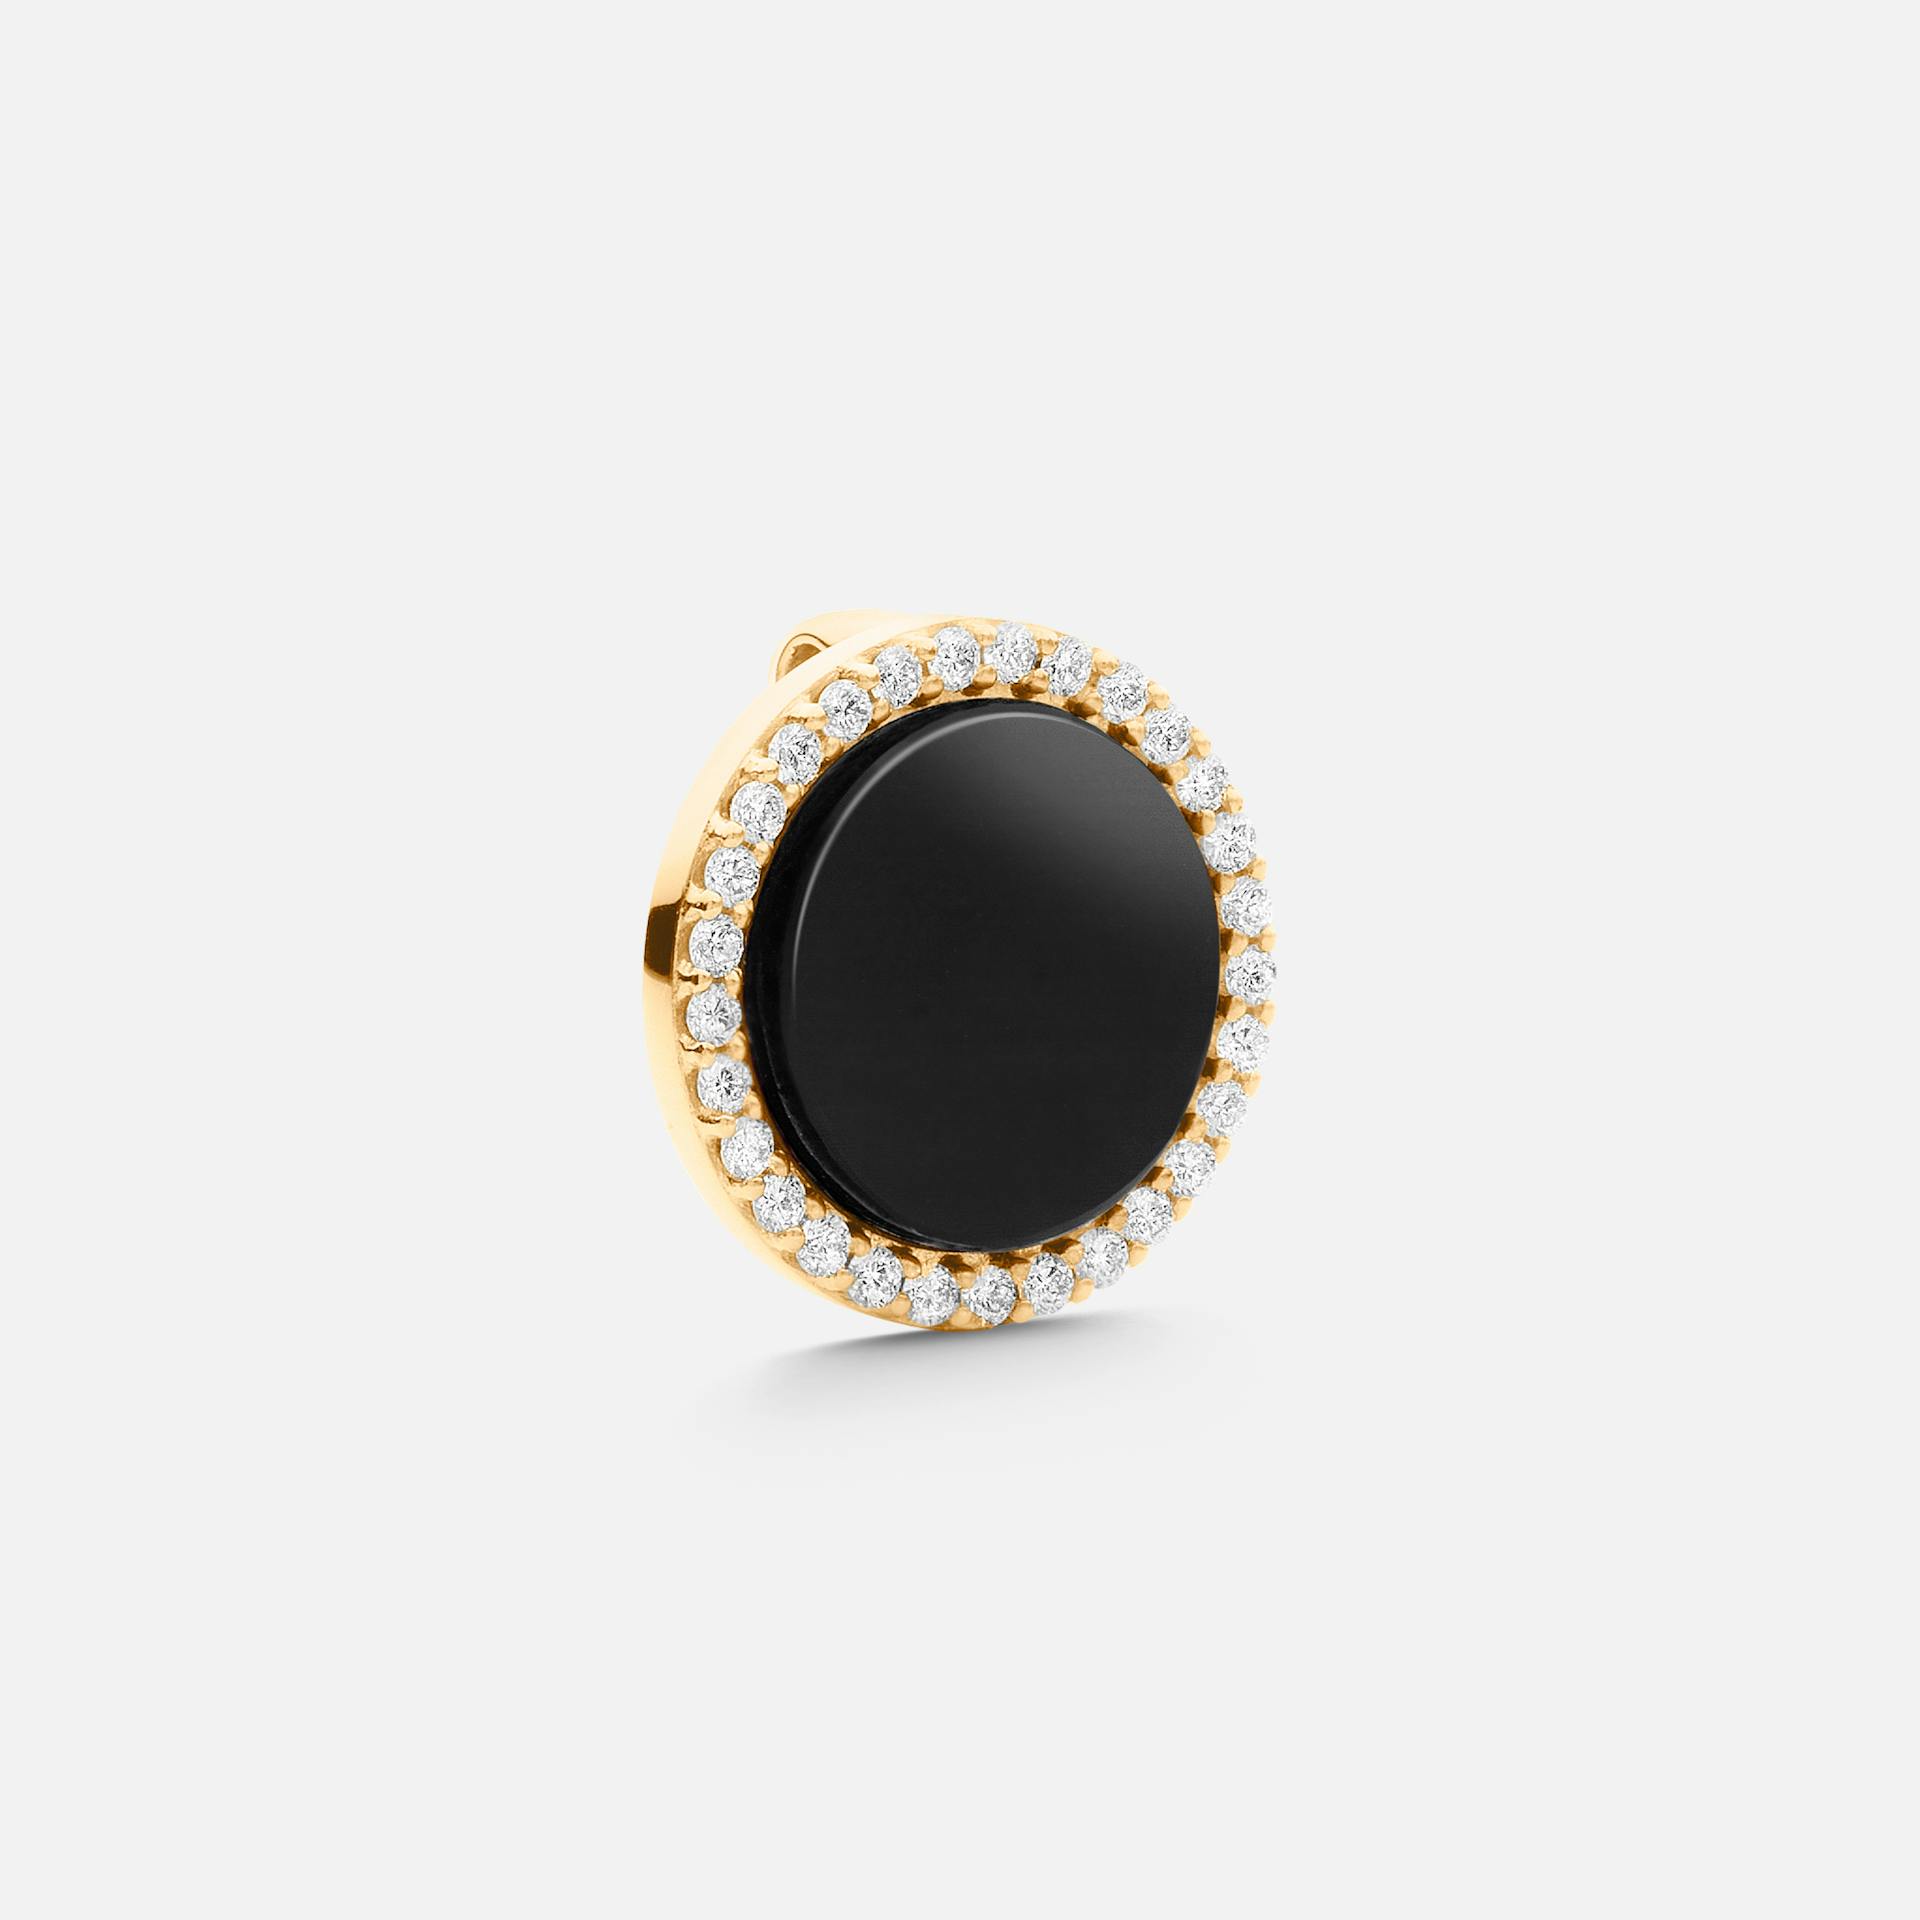 Sweet drops charm 18k gold with black onyx and diamonds 0.29 ct. TW. VS.